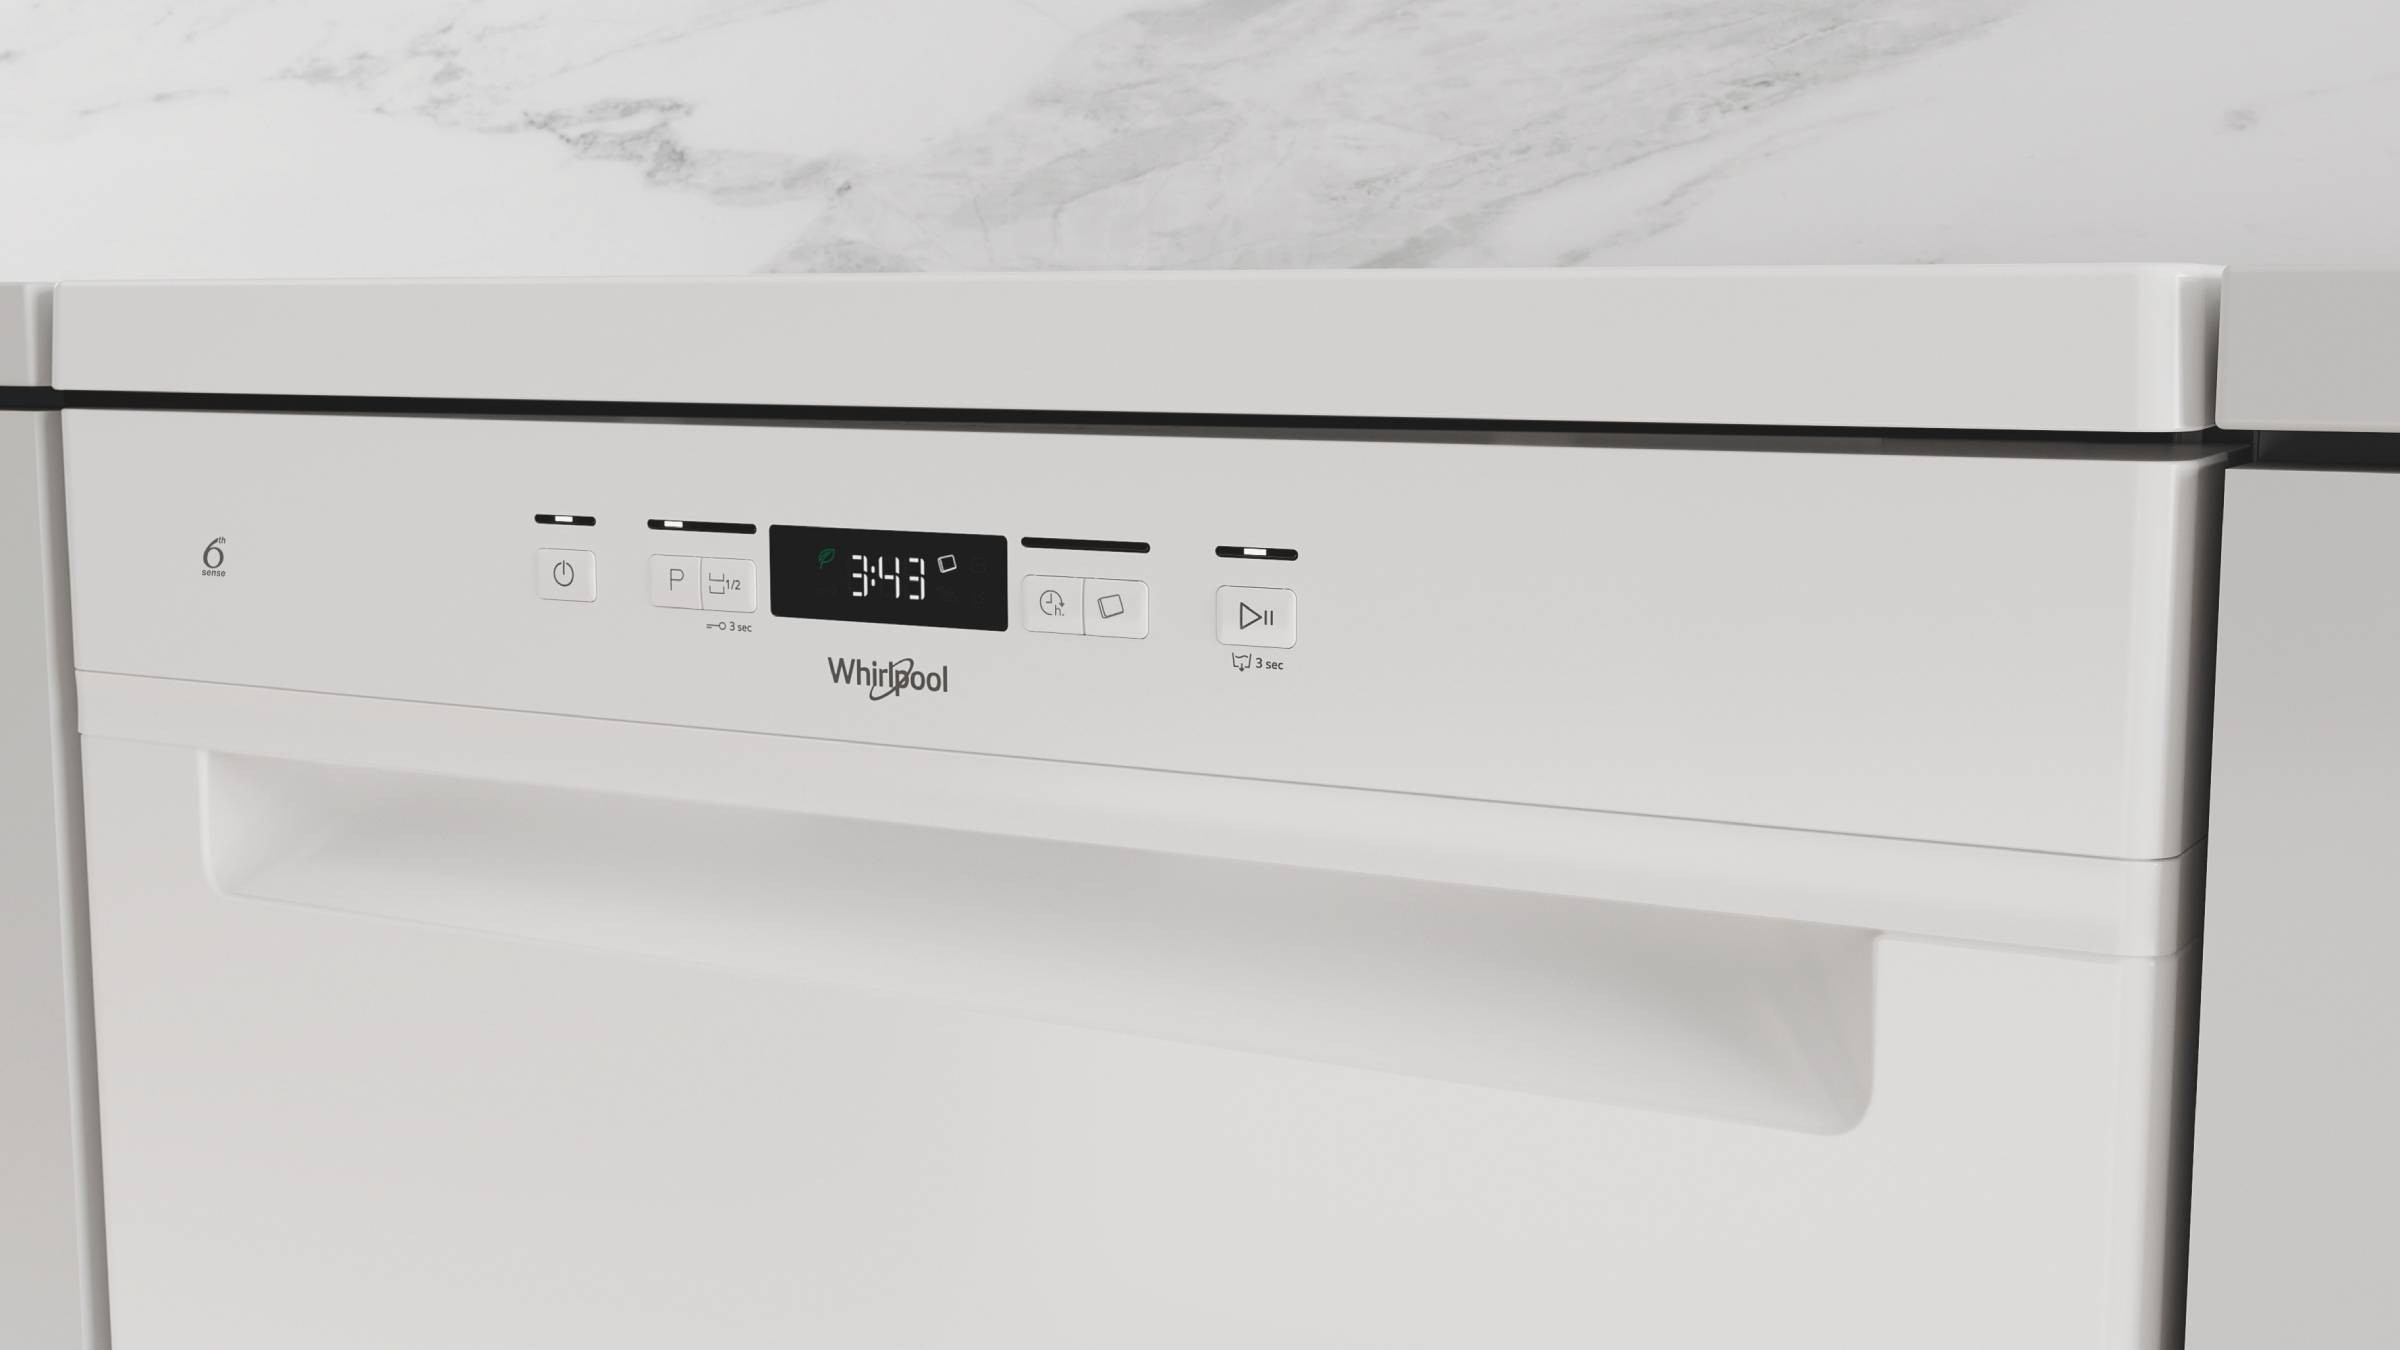 WHIRLPOOL Lave vaisselle 60 cm programme silence 14 couverts - W2FHD624